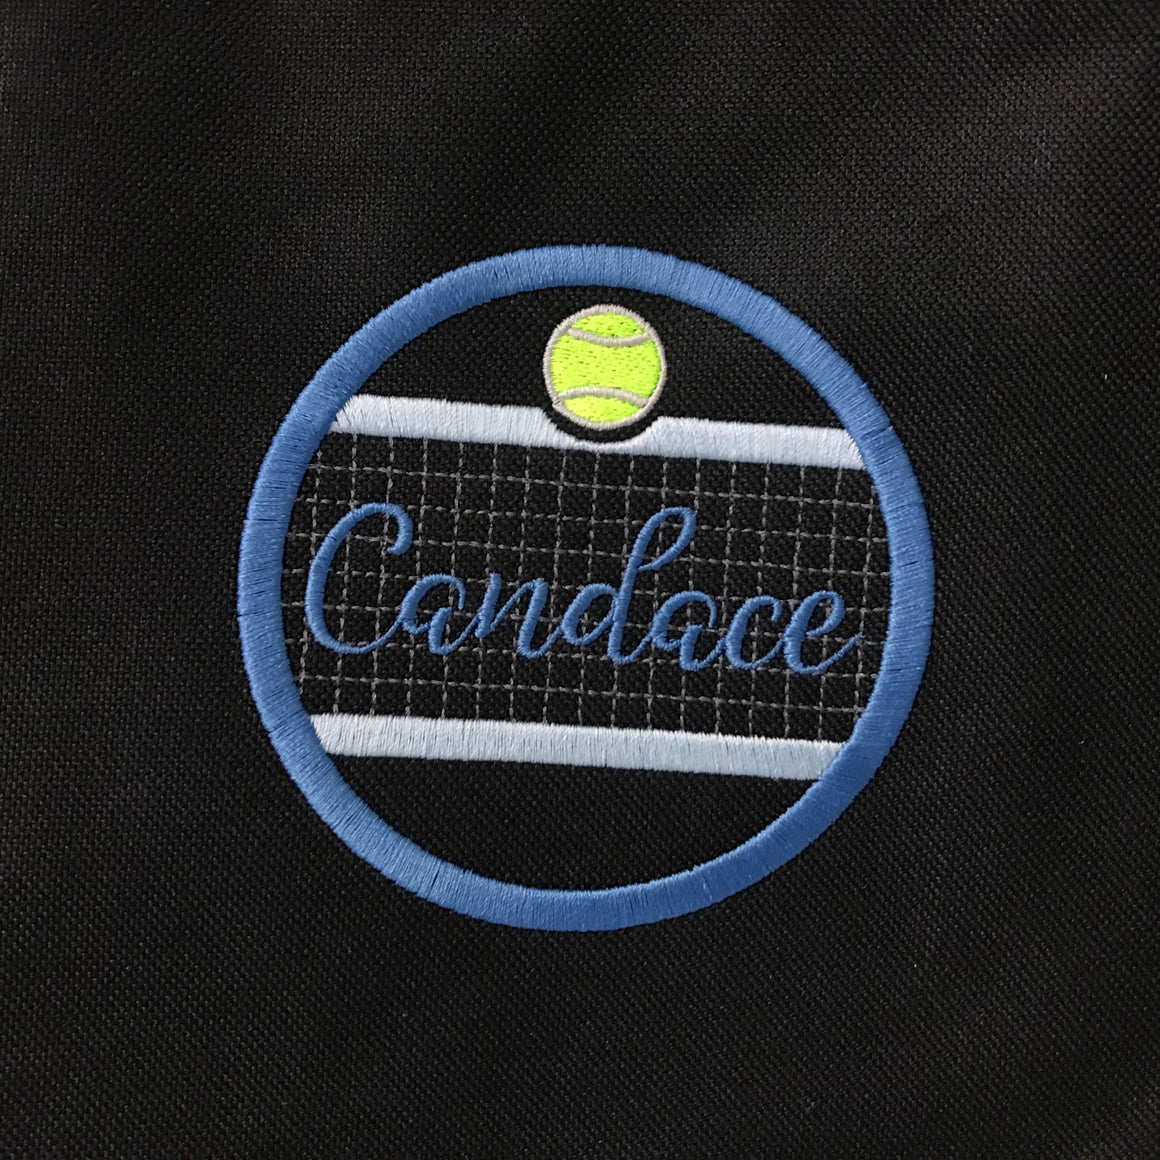 Personalized / Monogrammed Tennis Tote Bag